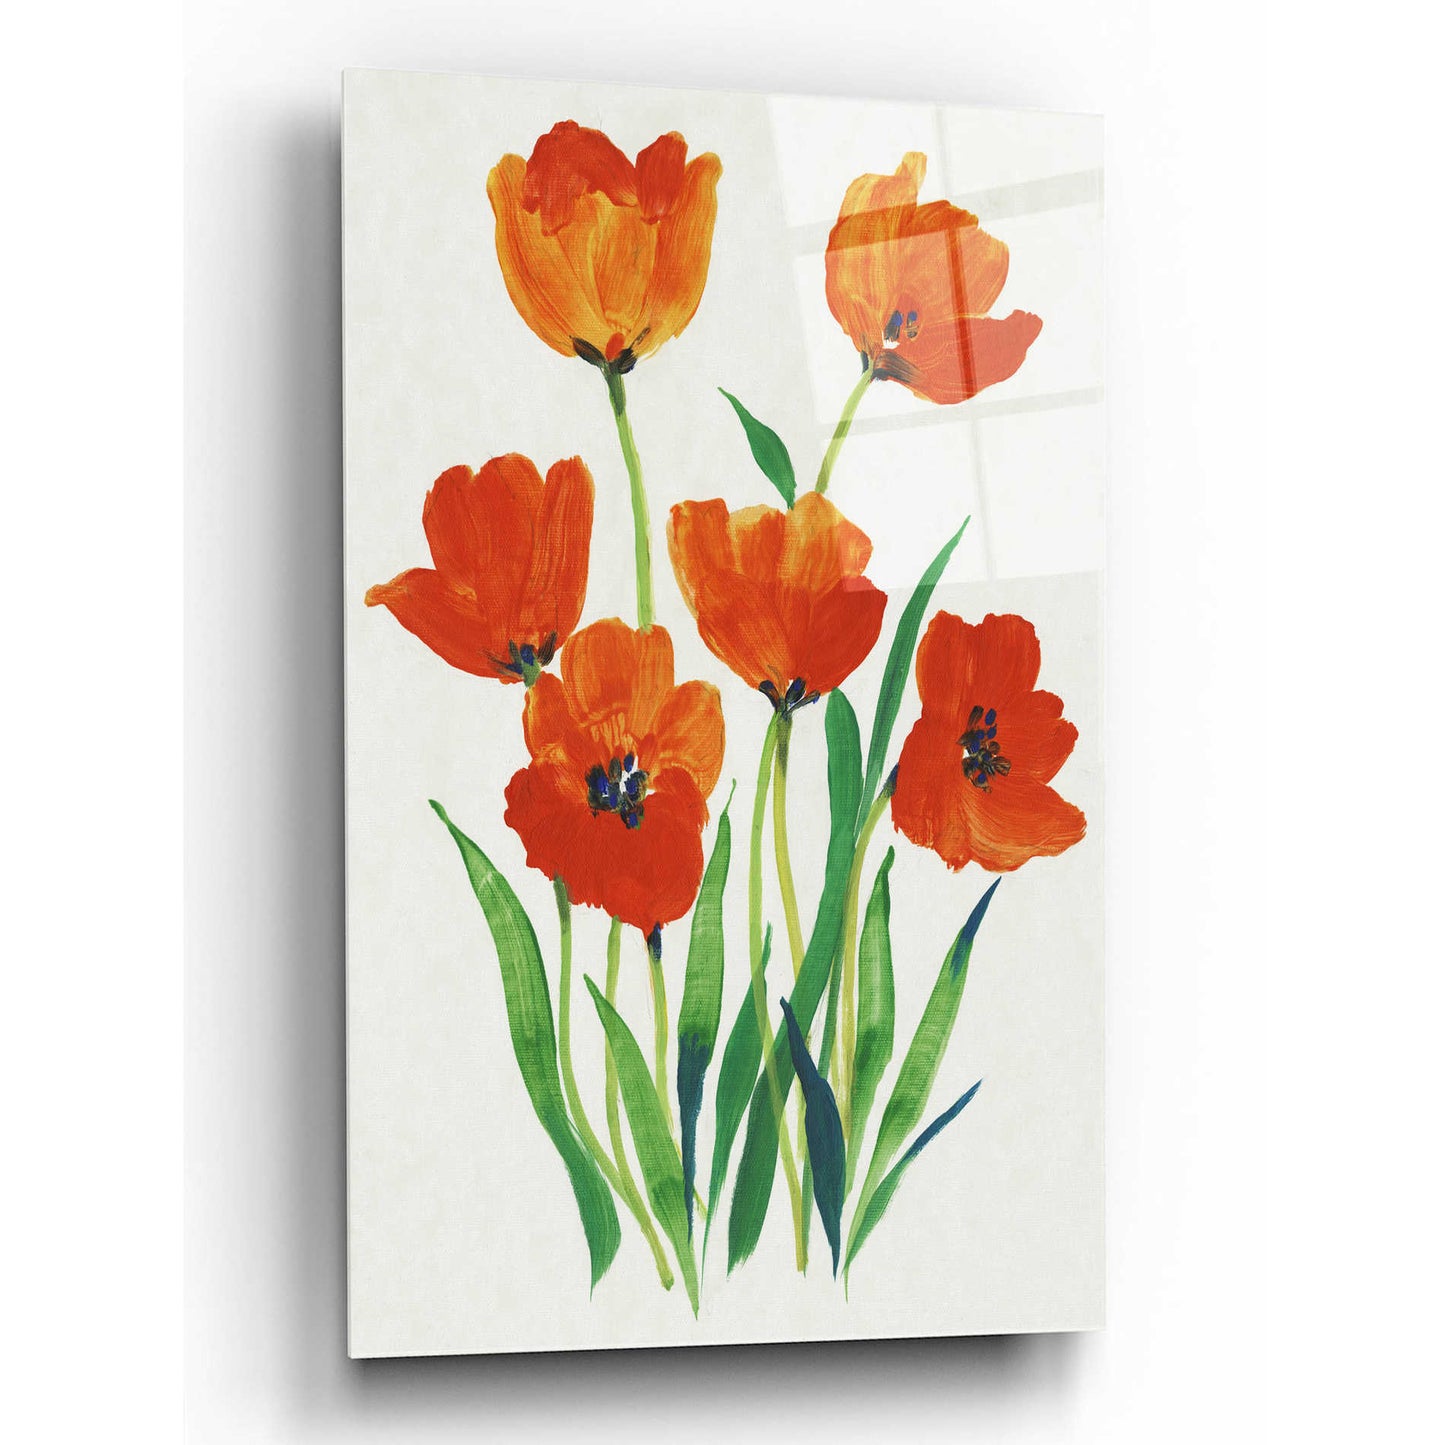 Epic Art 'Red Tulips in Bloom I' by Tim O'Toole, Acrylic Glass Wall Art,16x24